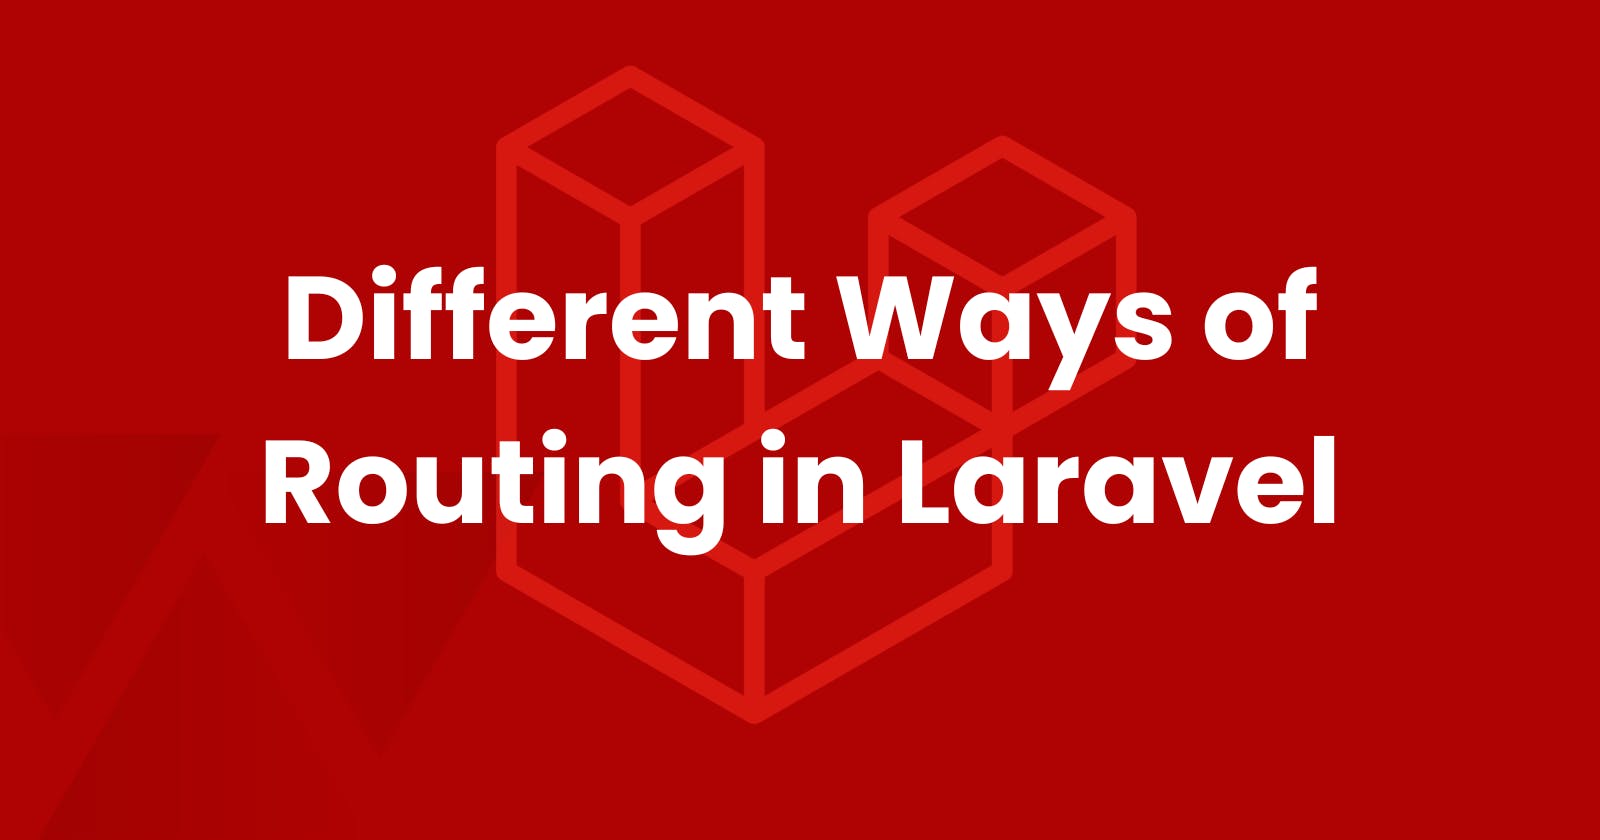 🎯Different Ways of Routing in Laravel